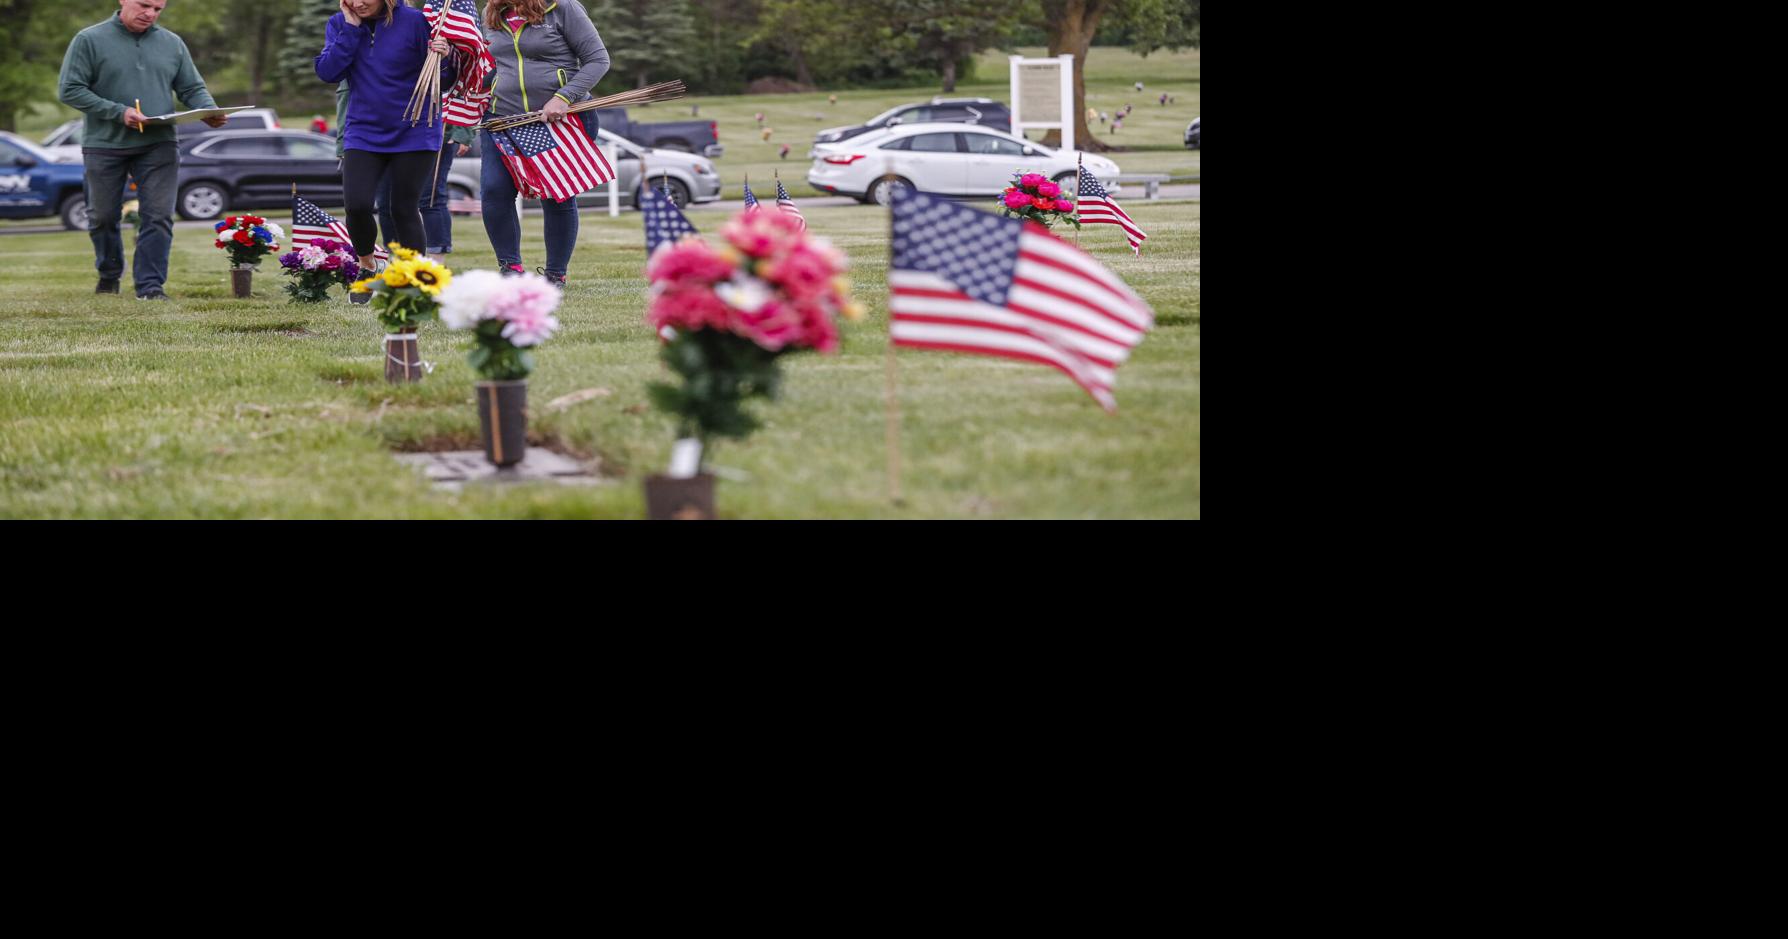 Local volunteers place flags on veterans' graves in honor of Memorial Day, News